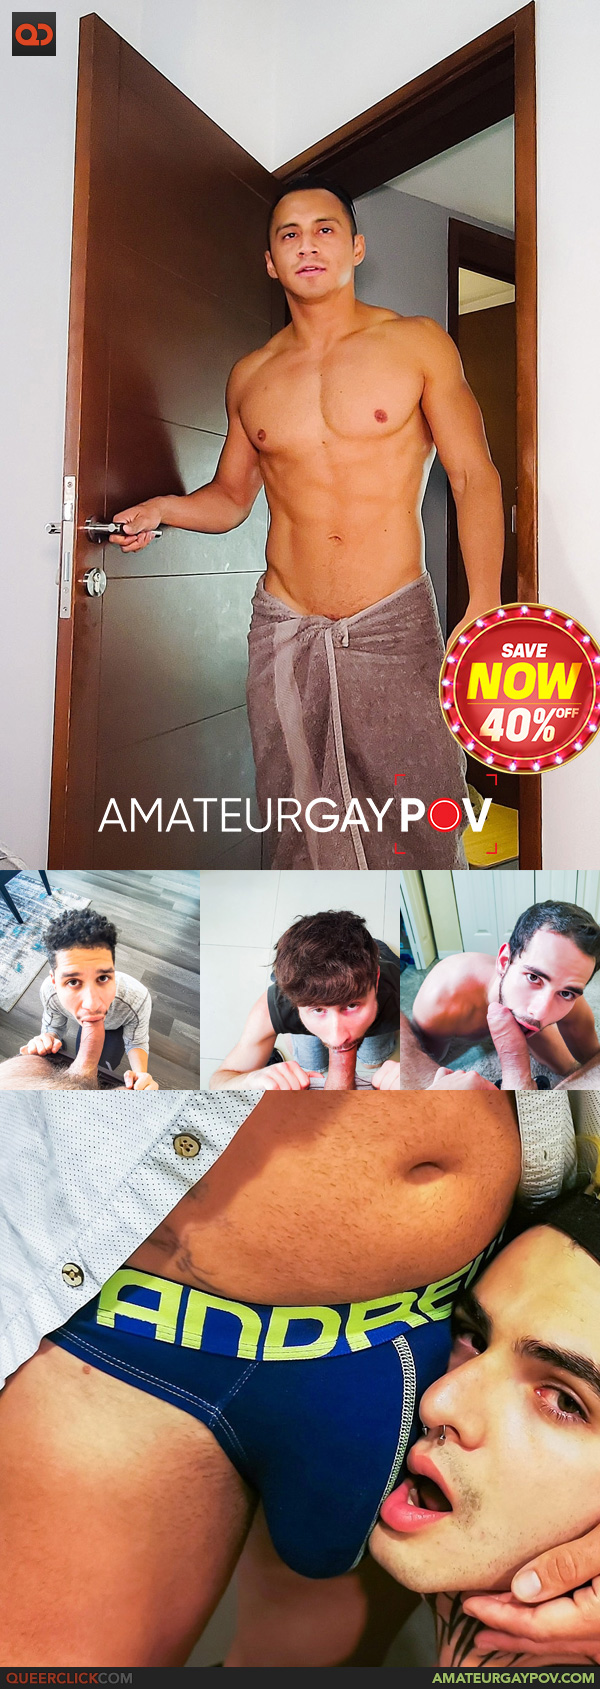 New Site Attack - Amateur Gay POV